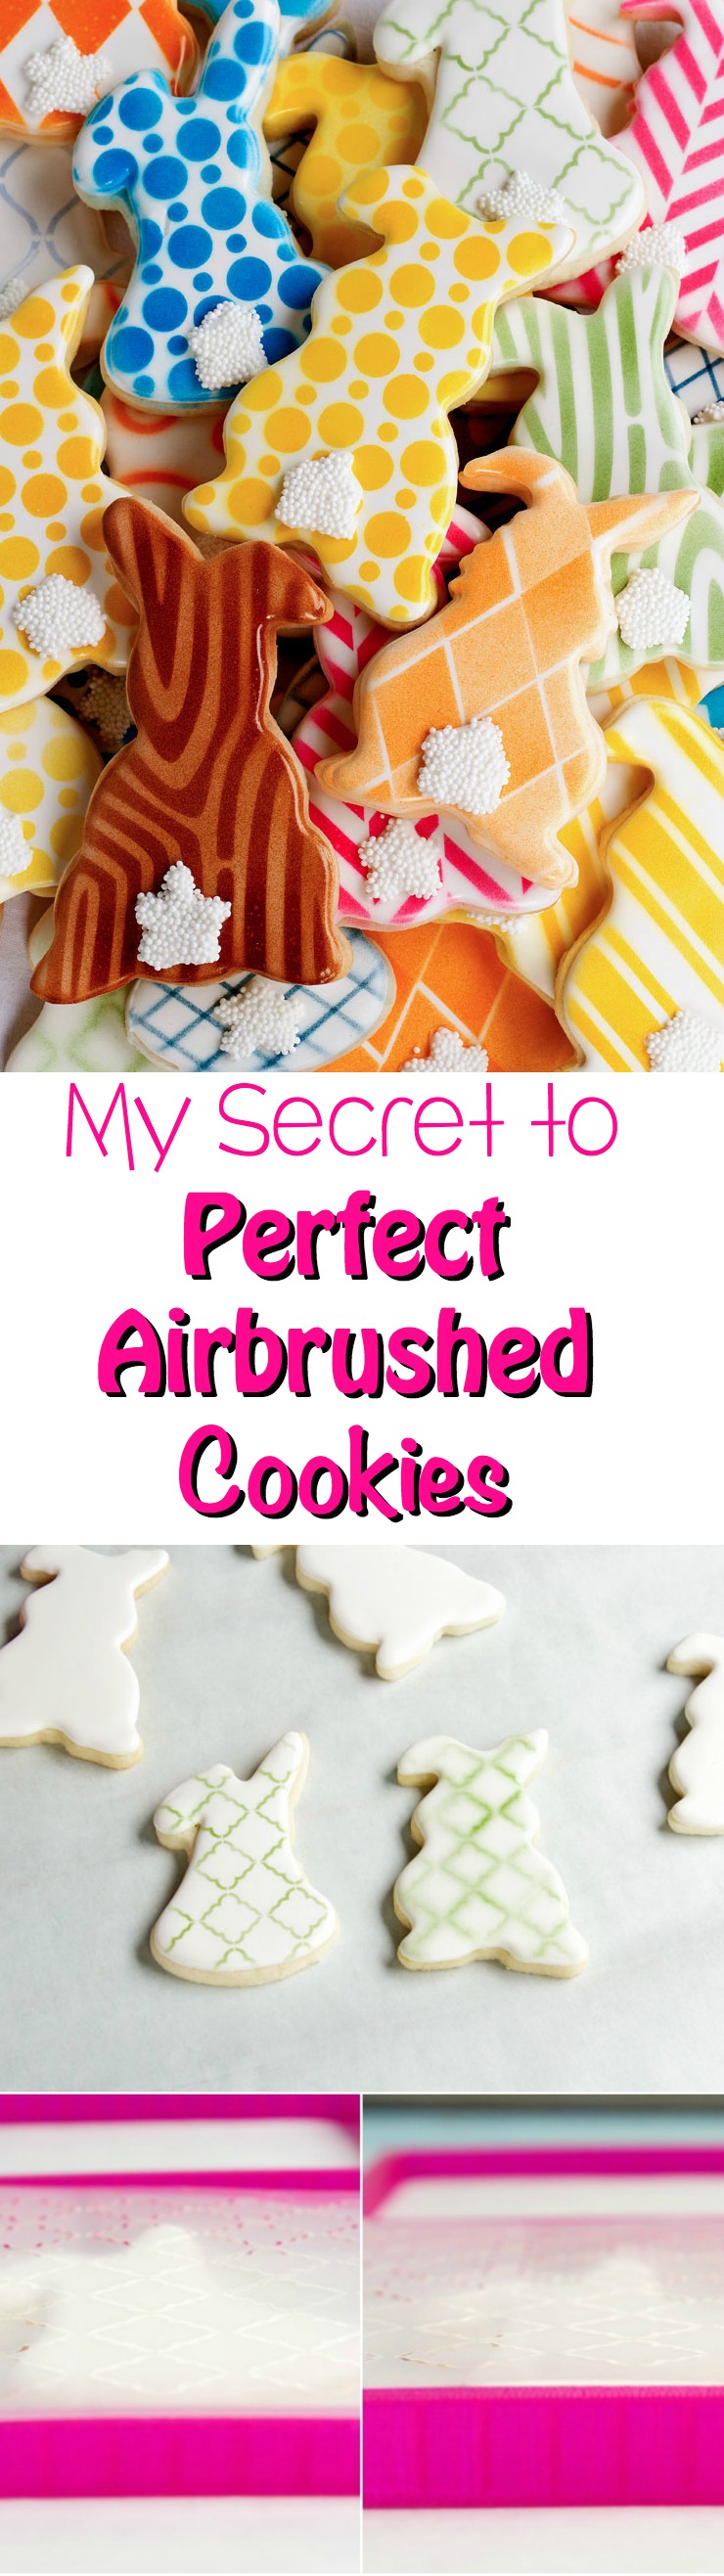 My Secret to Perfect Airbrushed Cookies via www.thebearfootbaker.com